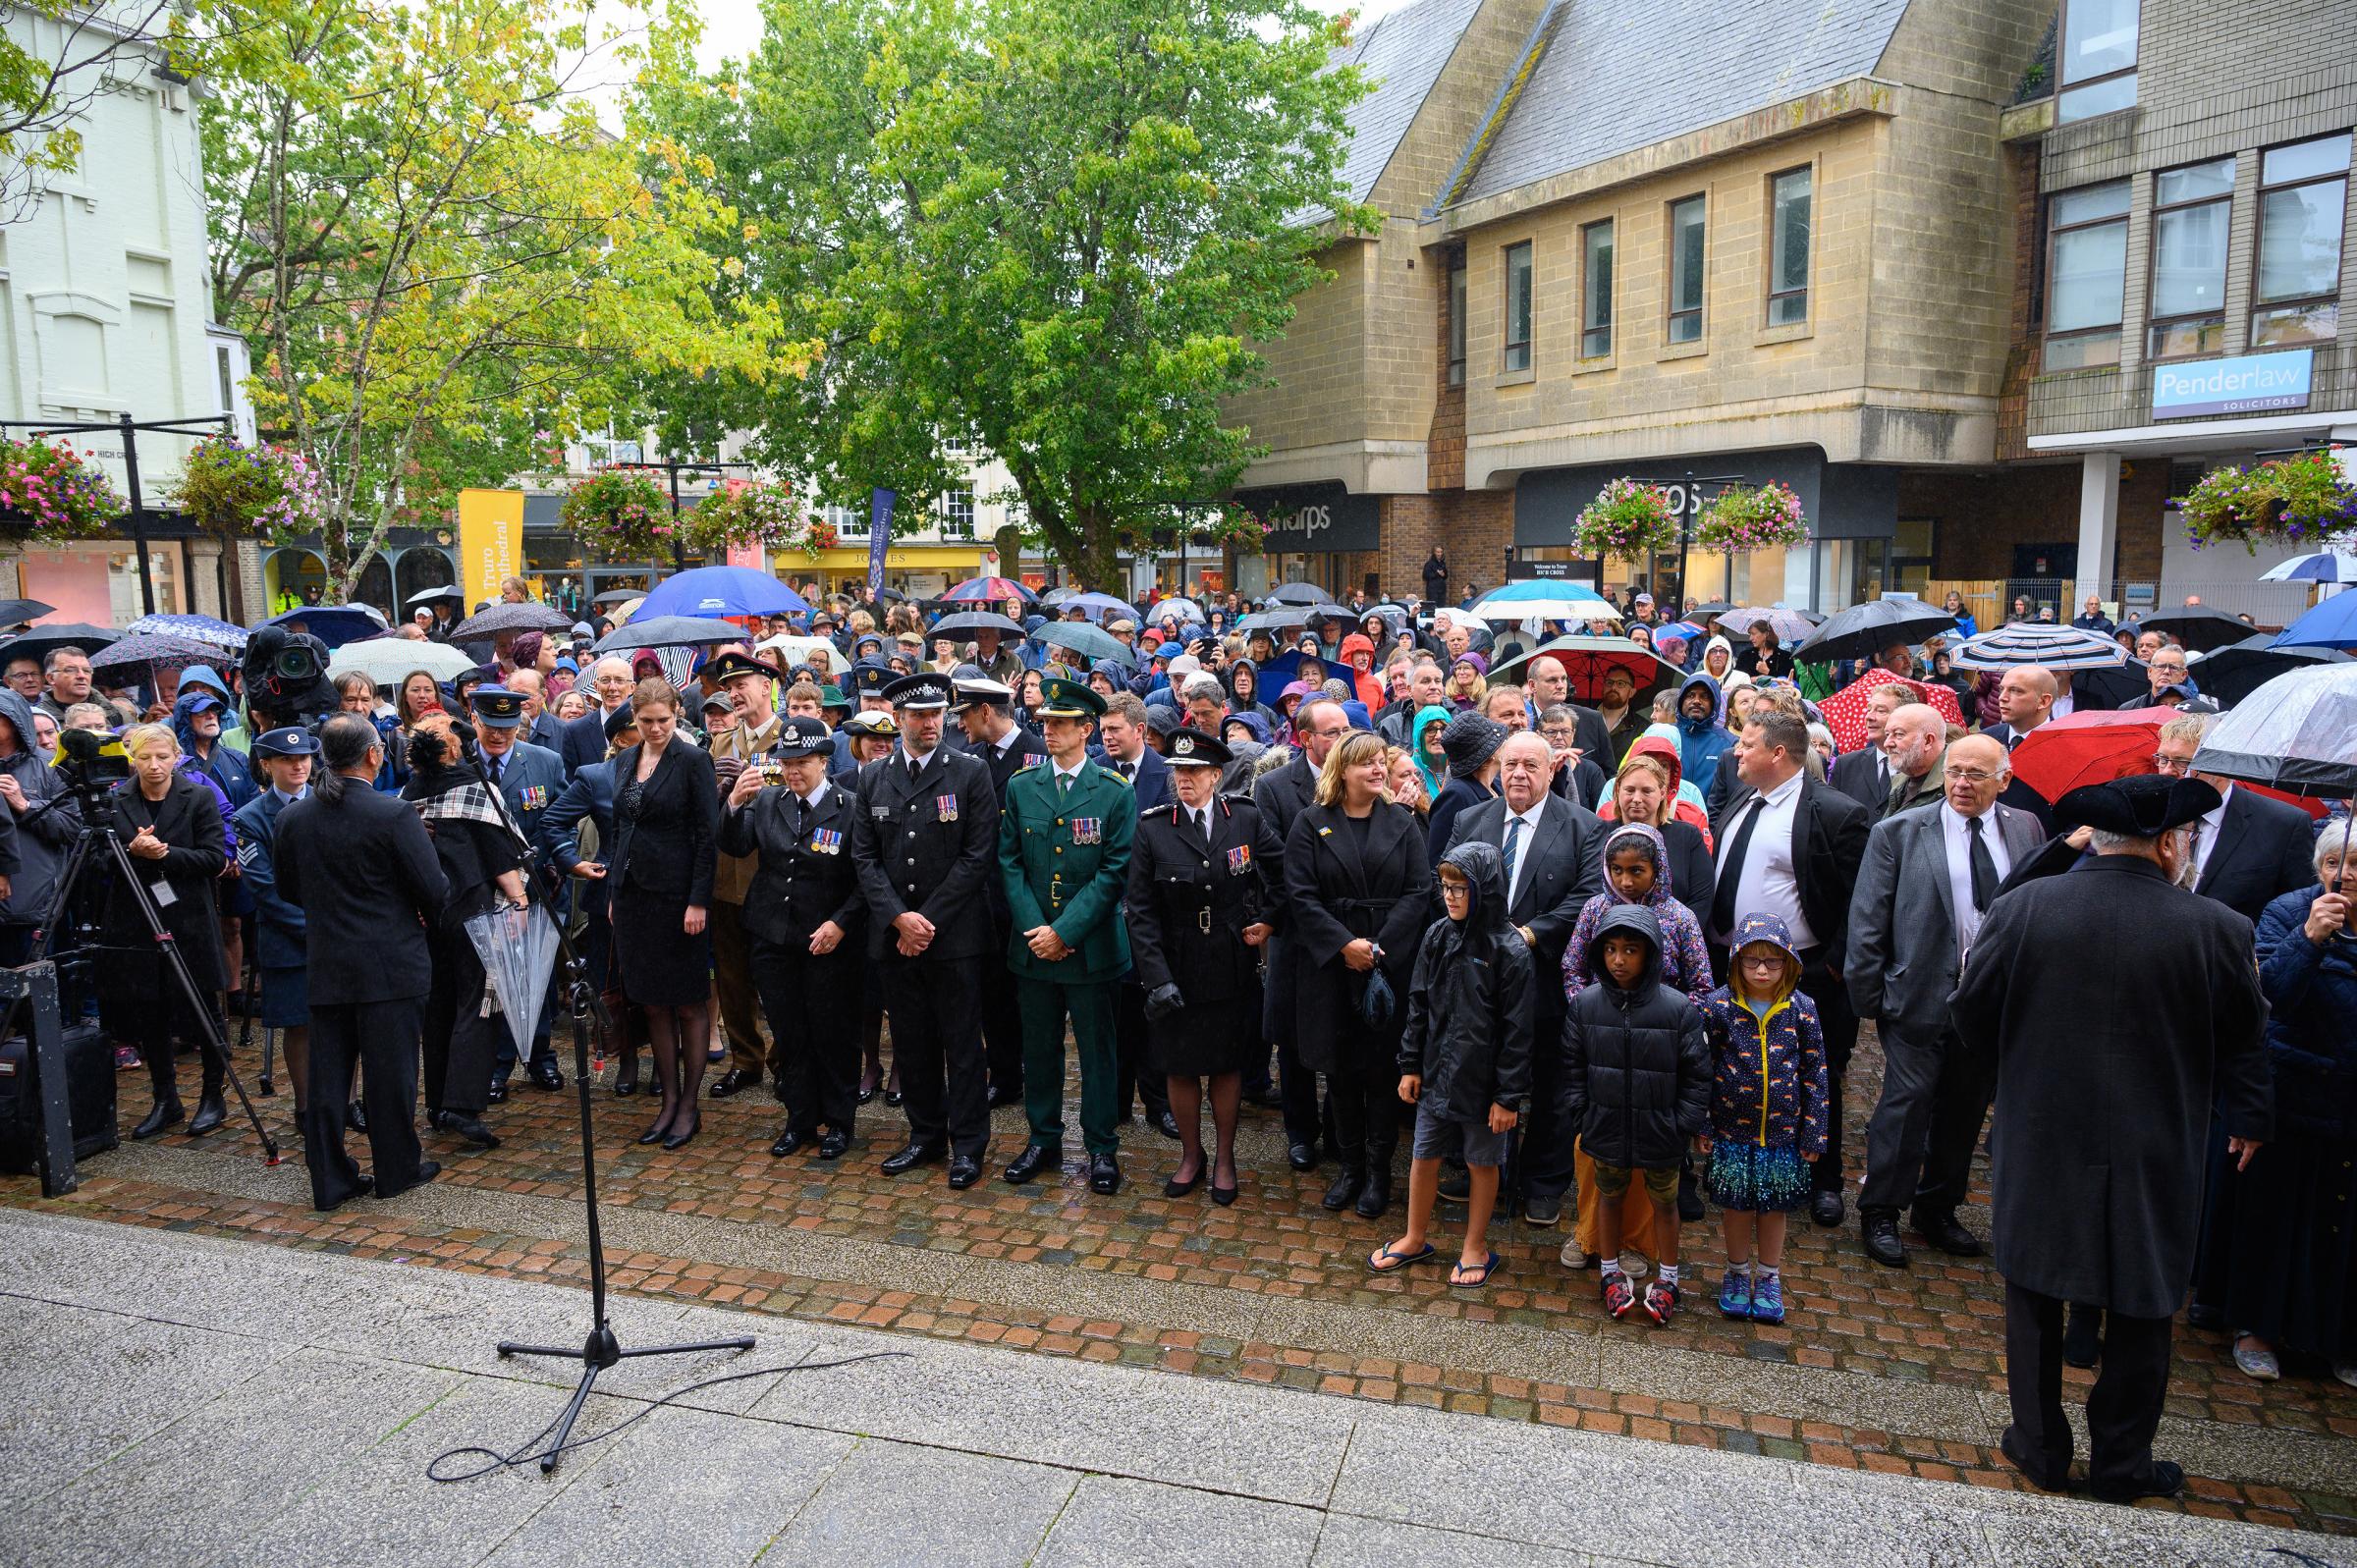 Truro had two Proclamation ceremonies yesterday Picture: Paul Richards PR4Photos